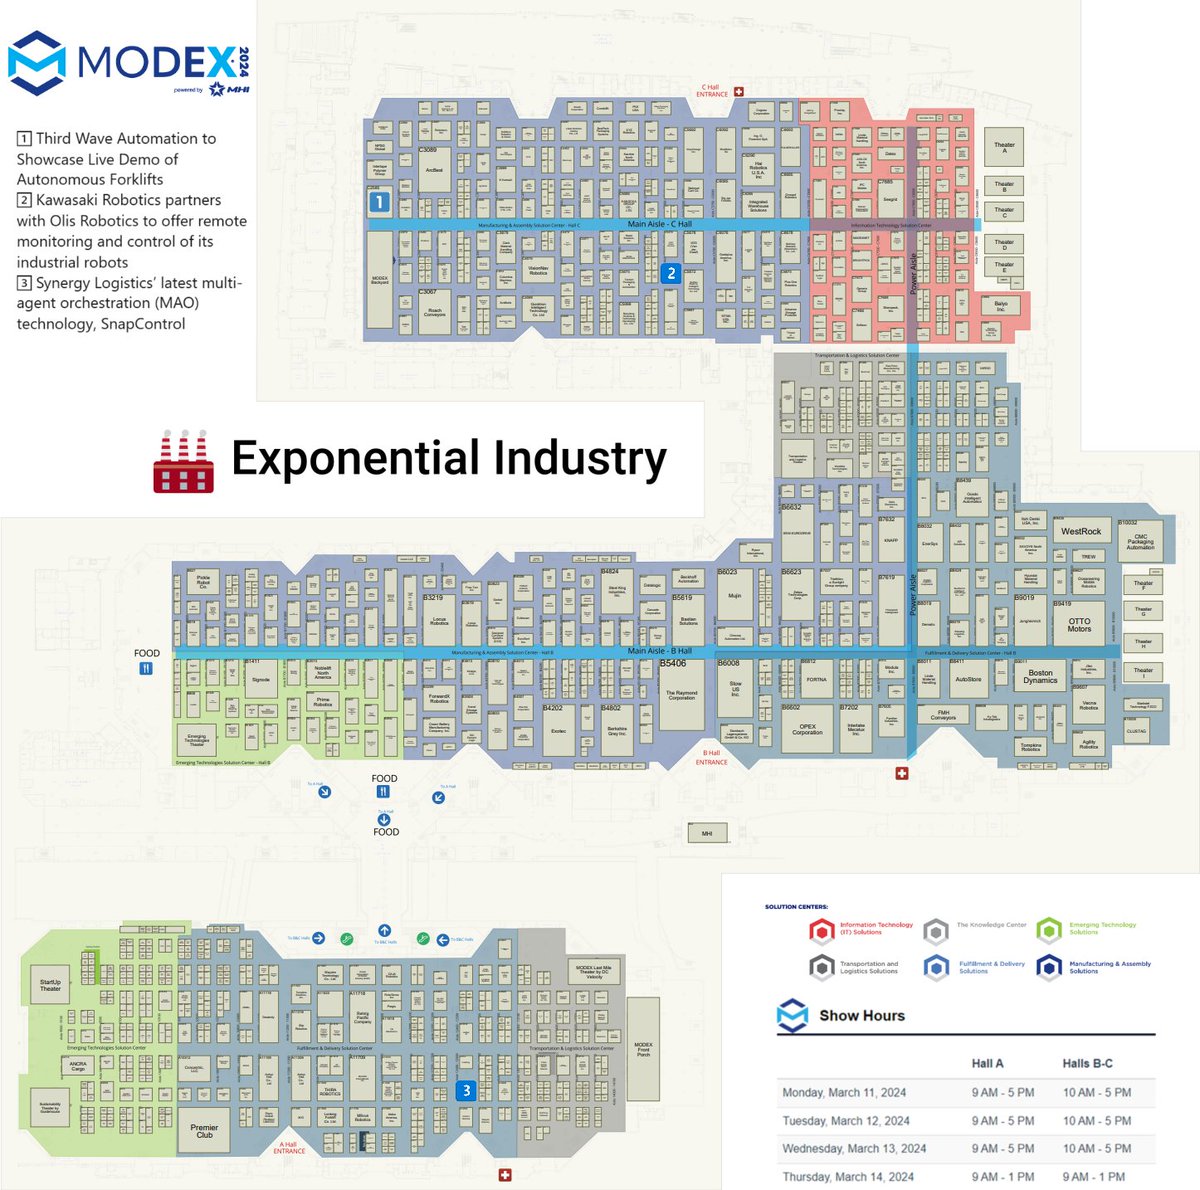 Over 1,000 leading manufacturing and supply chain suppliers are scheduled at #MODEX2024 by @poweredbymhi. Here are three booths you should stop by: